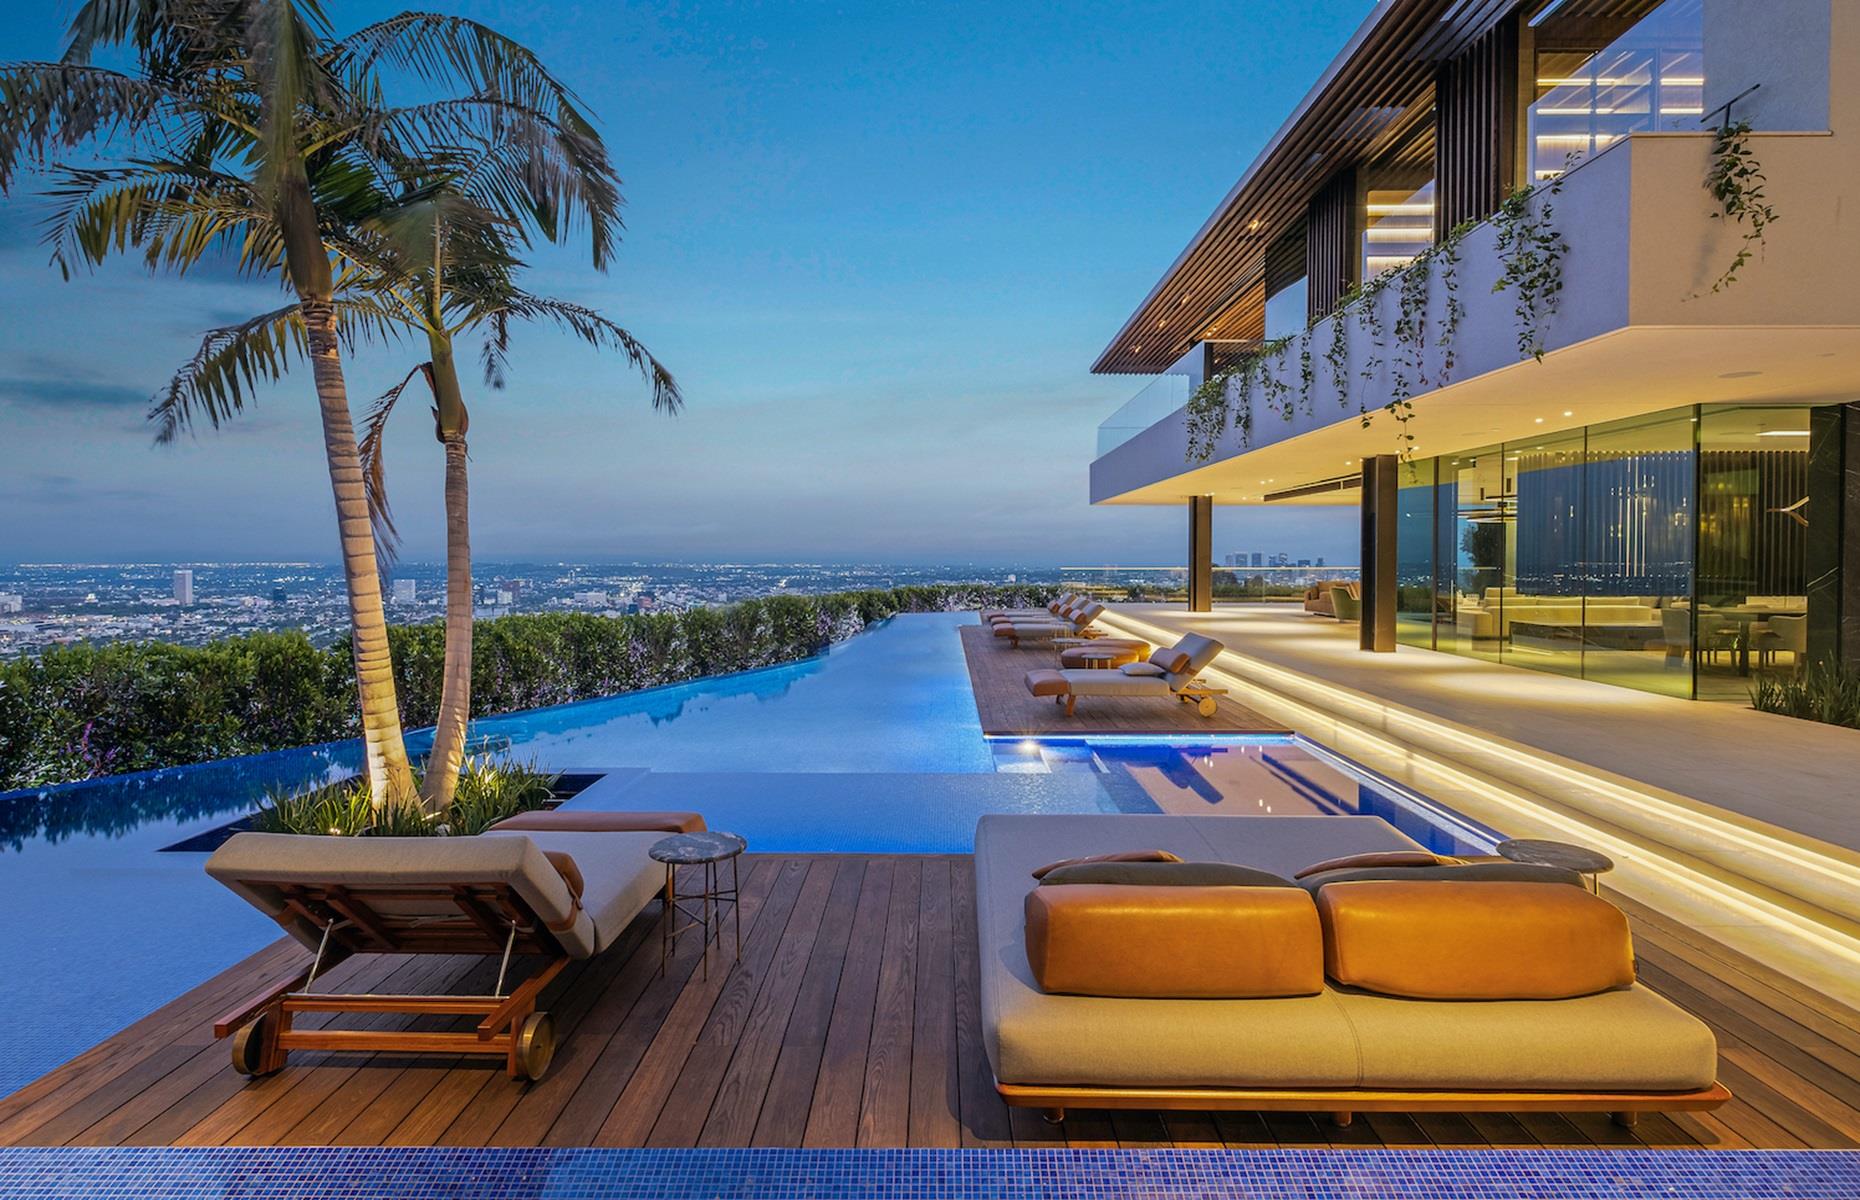 <p>The backyard is also home to a 15-foot outdoor television, which rises from the ground with horizontal and vertical rotation, making it visible from every single room in the house. The pad also benefits from an enormous rooftop deck, with <a href="https://www.loveproperty.com/gallerylist/72934/homes-with-jaw-dropping-views">unrivalled views</a>. To ensure this, the property's developer apparently forked out over £328,580 ($400k) to have the power lines removed from the surrounding area. Talk about going above and beyond! </p>